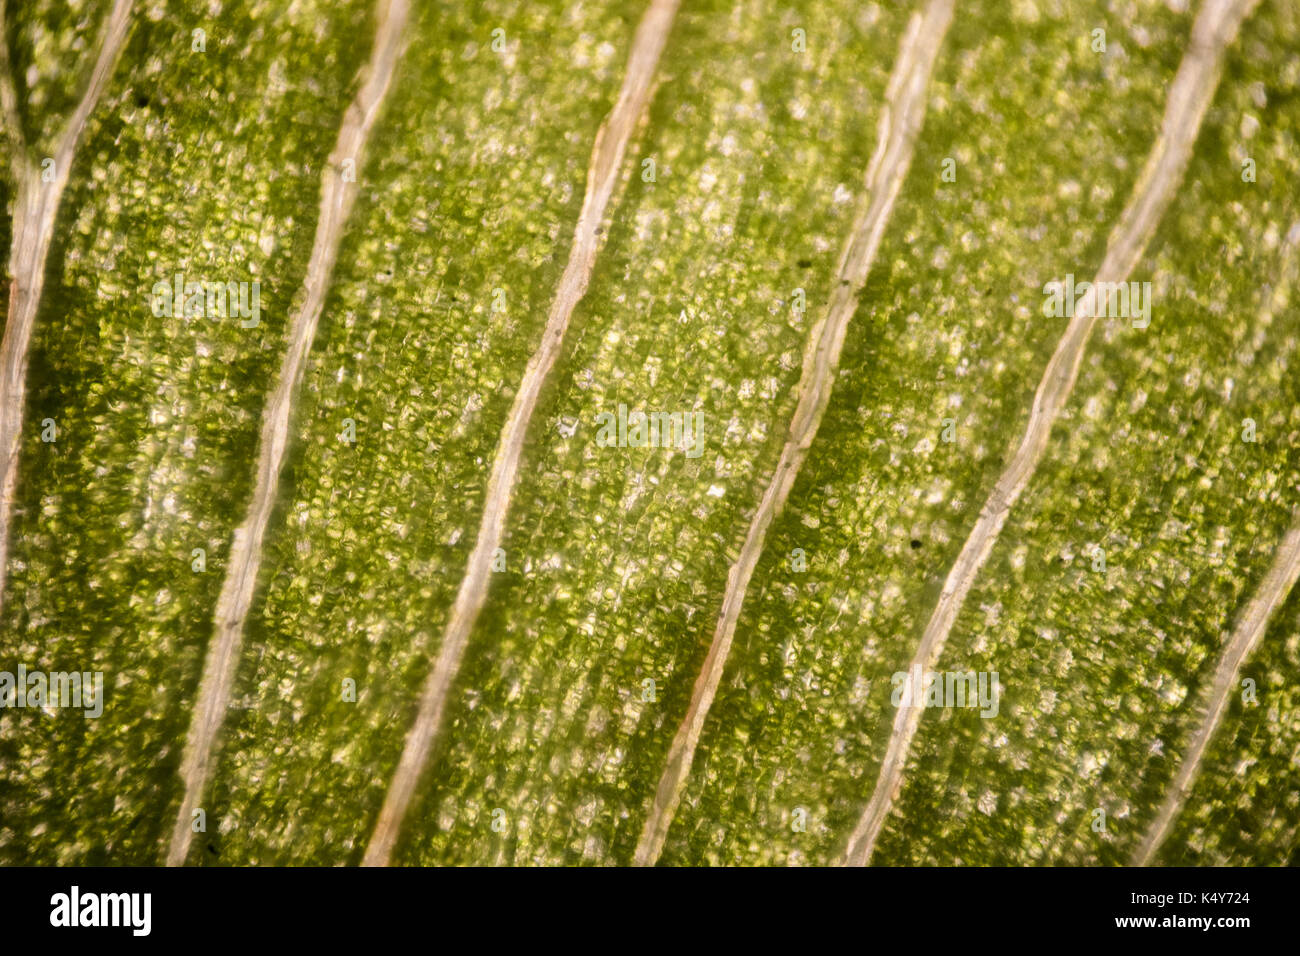 Leaf cells under microscope. micrograph, leaf under a microscope, organ-producing oxygen and carbon dioxide, the process of photosynthesis Stock Photo